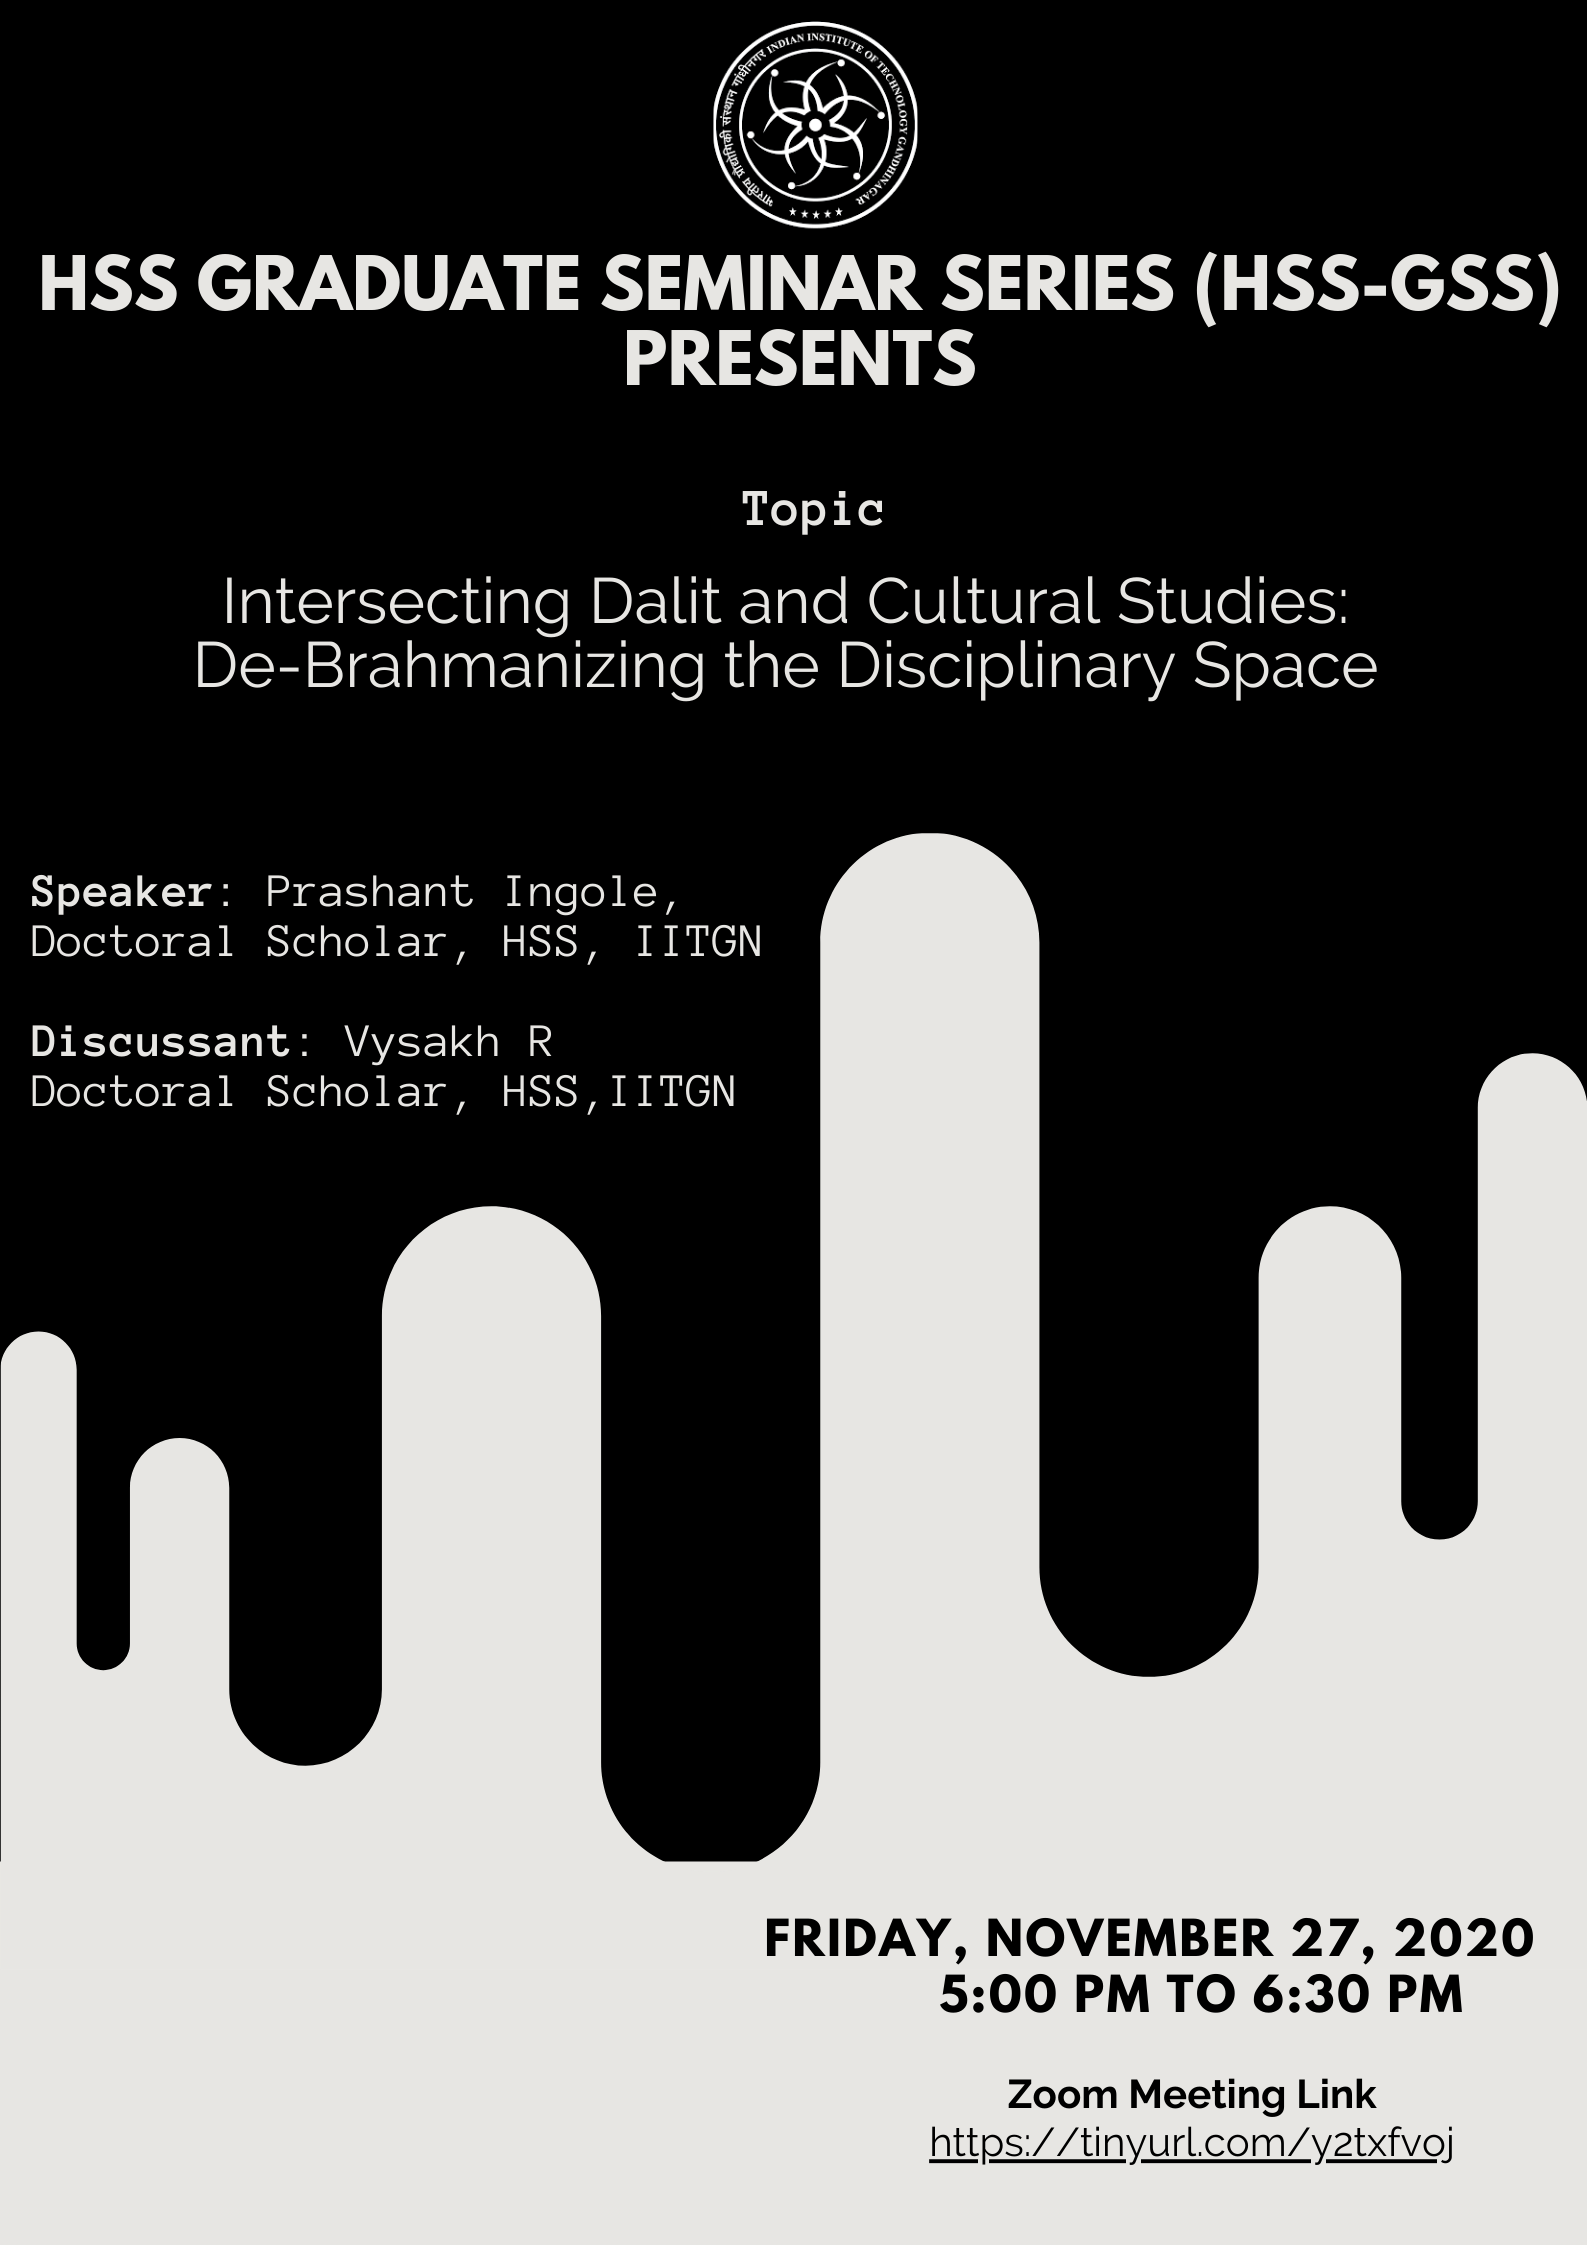 Intersecting Dalit and Cultural Studies: De-brahmanising the Disciplinary Space